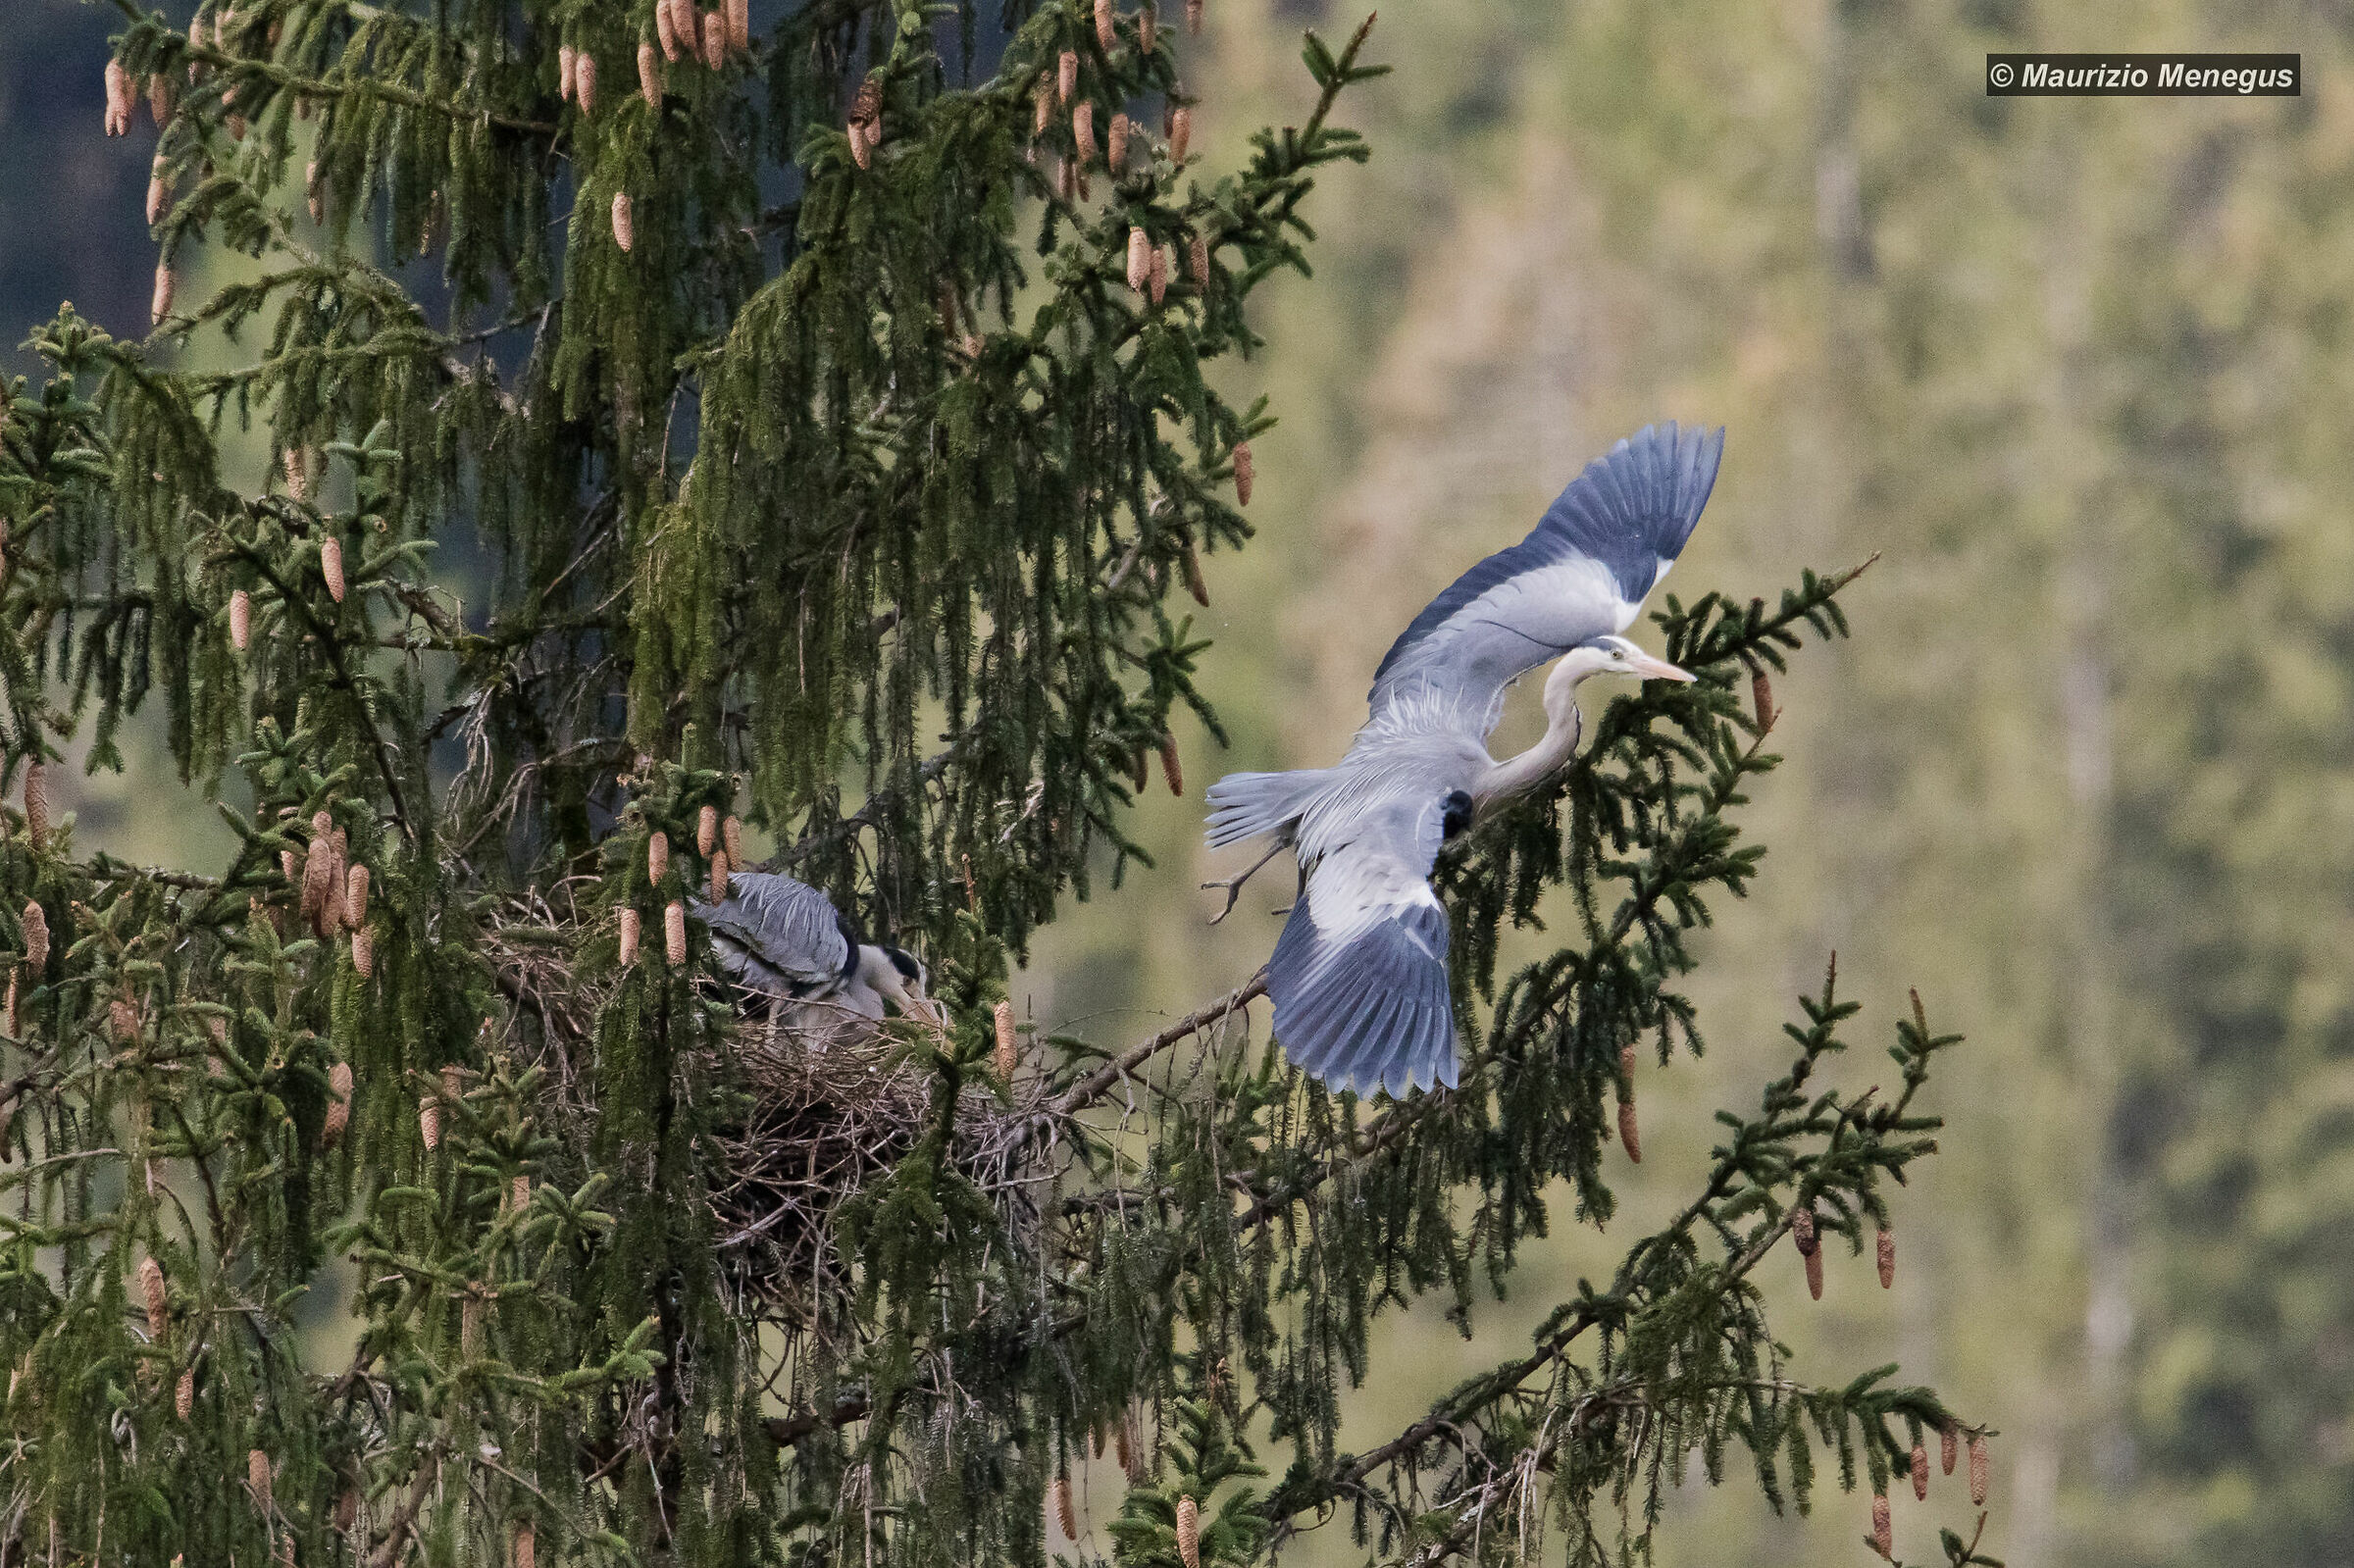 The Grey Heron's detachment from the nest...